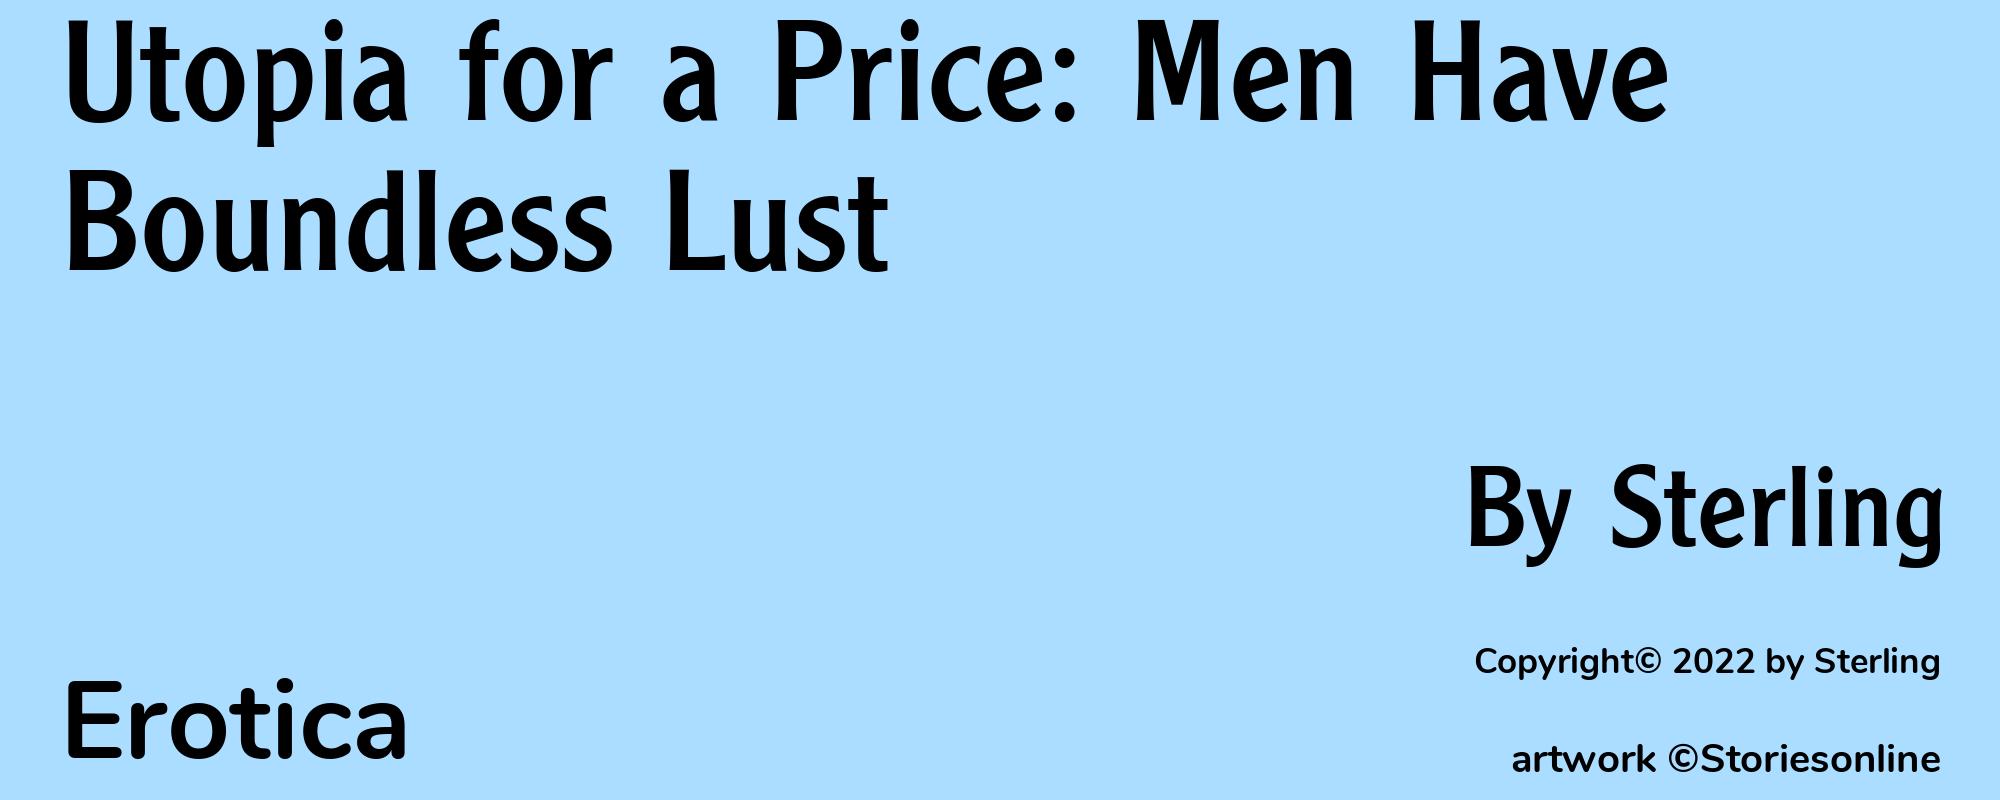 Utopia for a Price: Men Have Boundless Lust - Cover